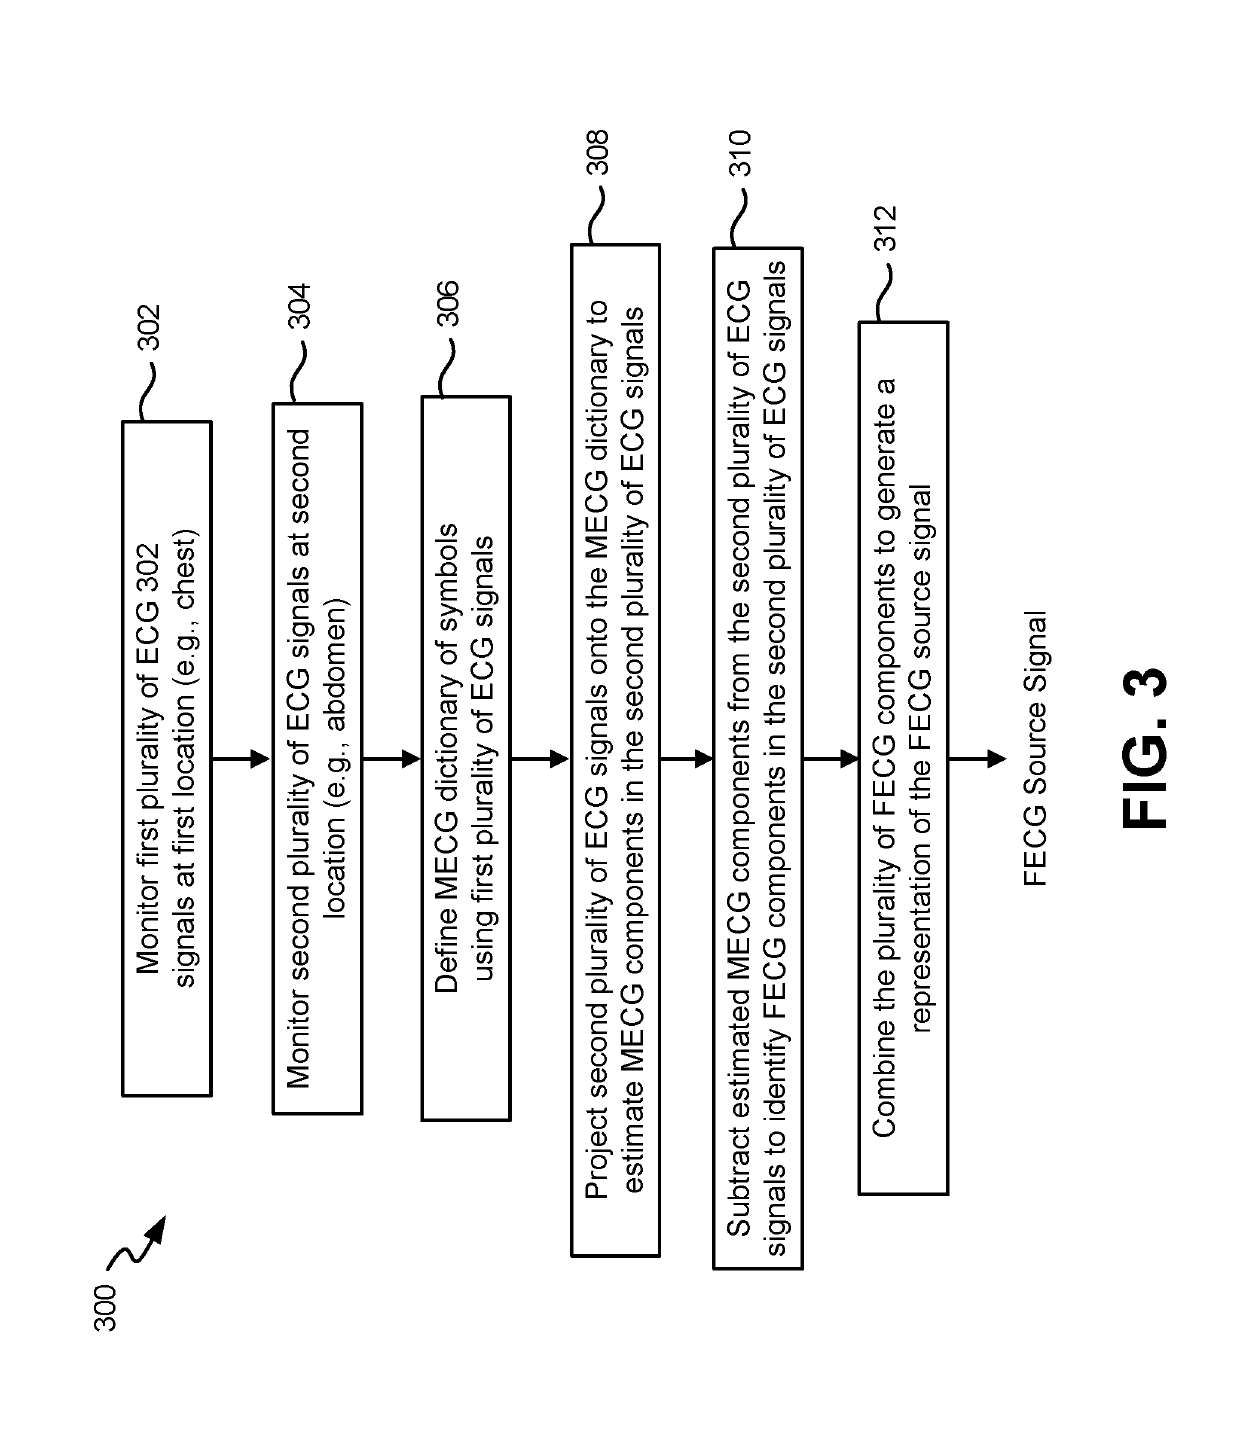 System and method for non-invasive extraction of fetal electrocardiogram signals